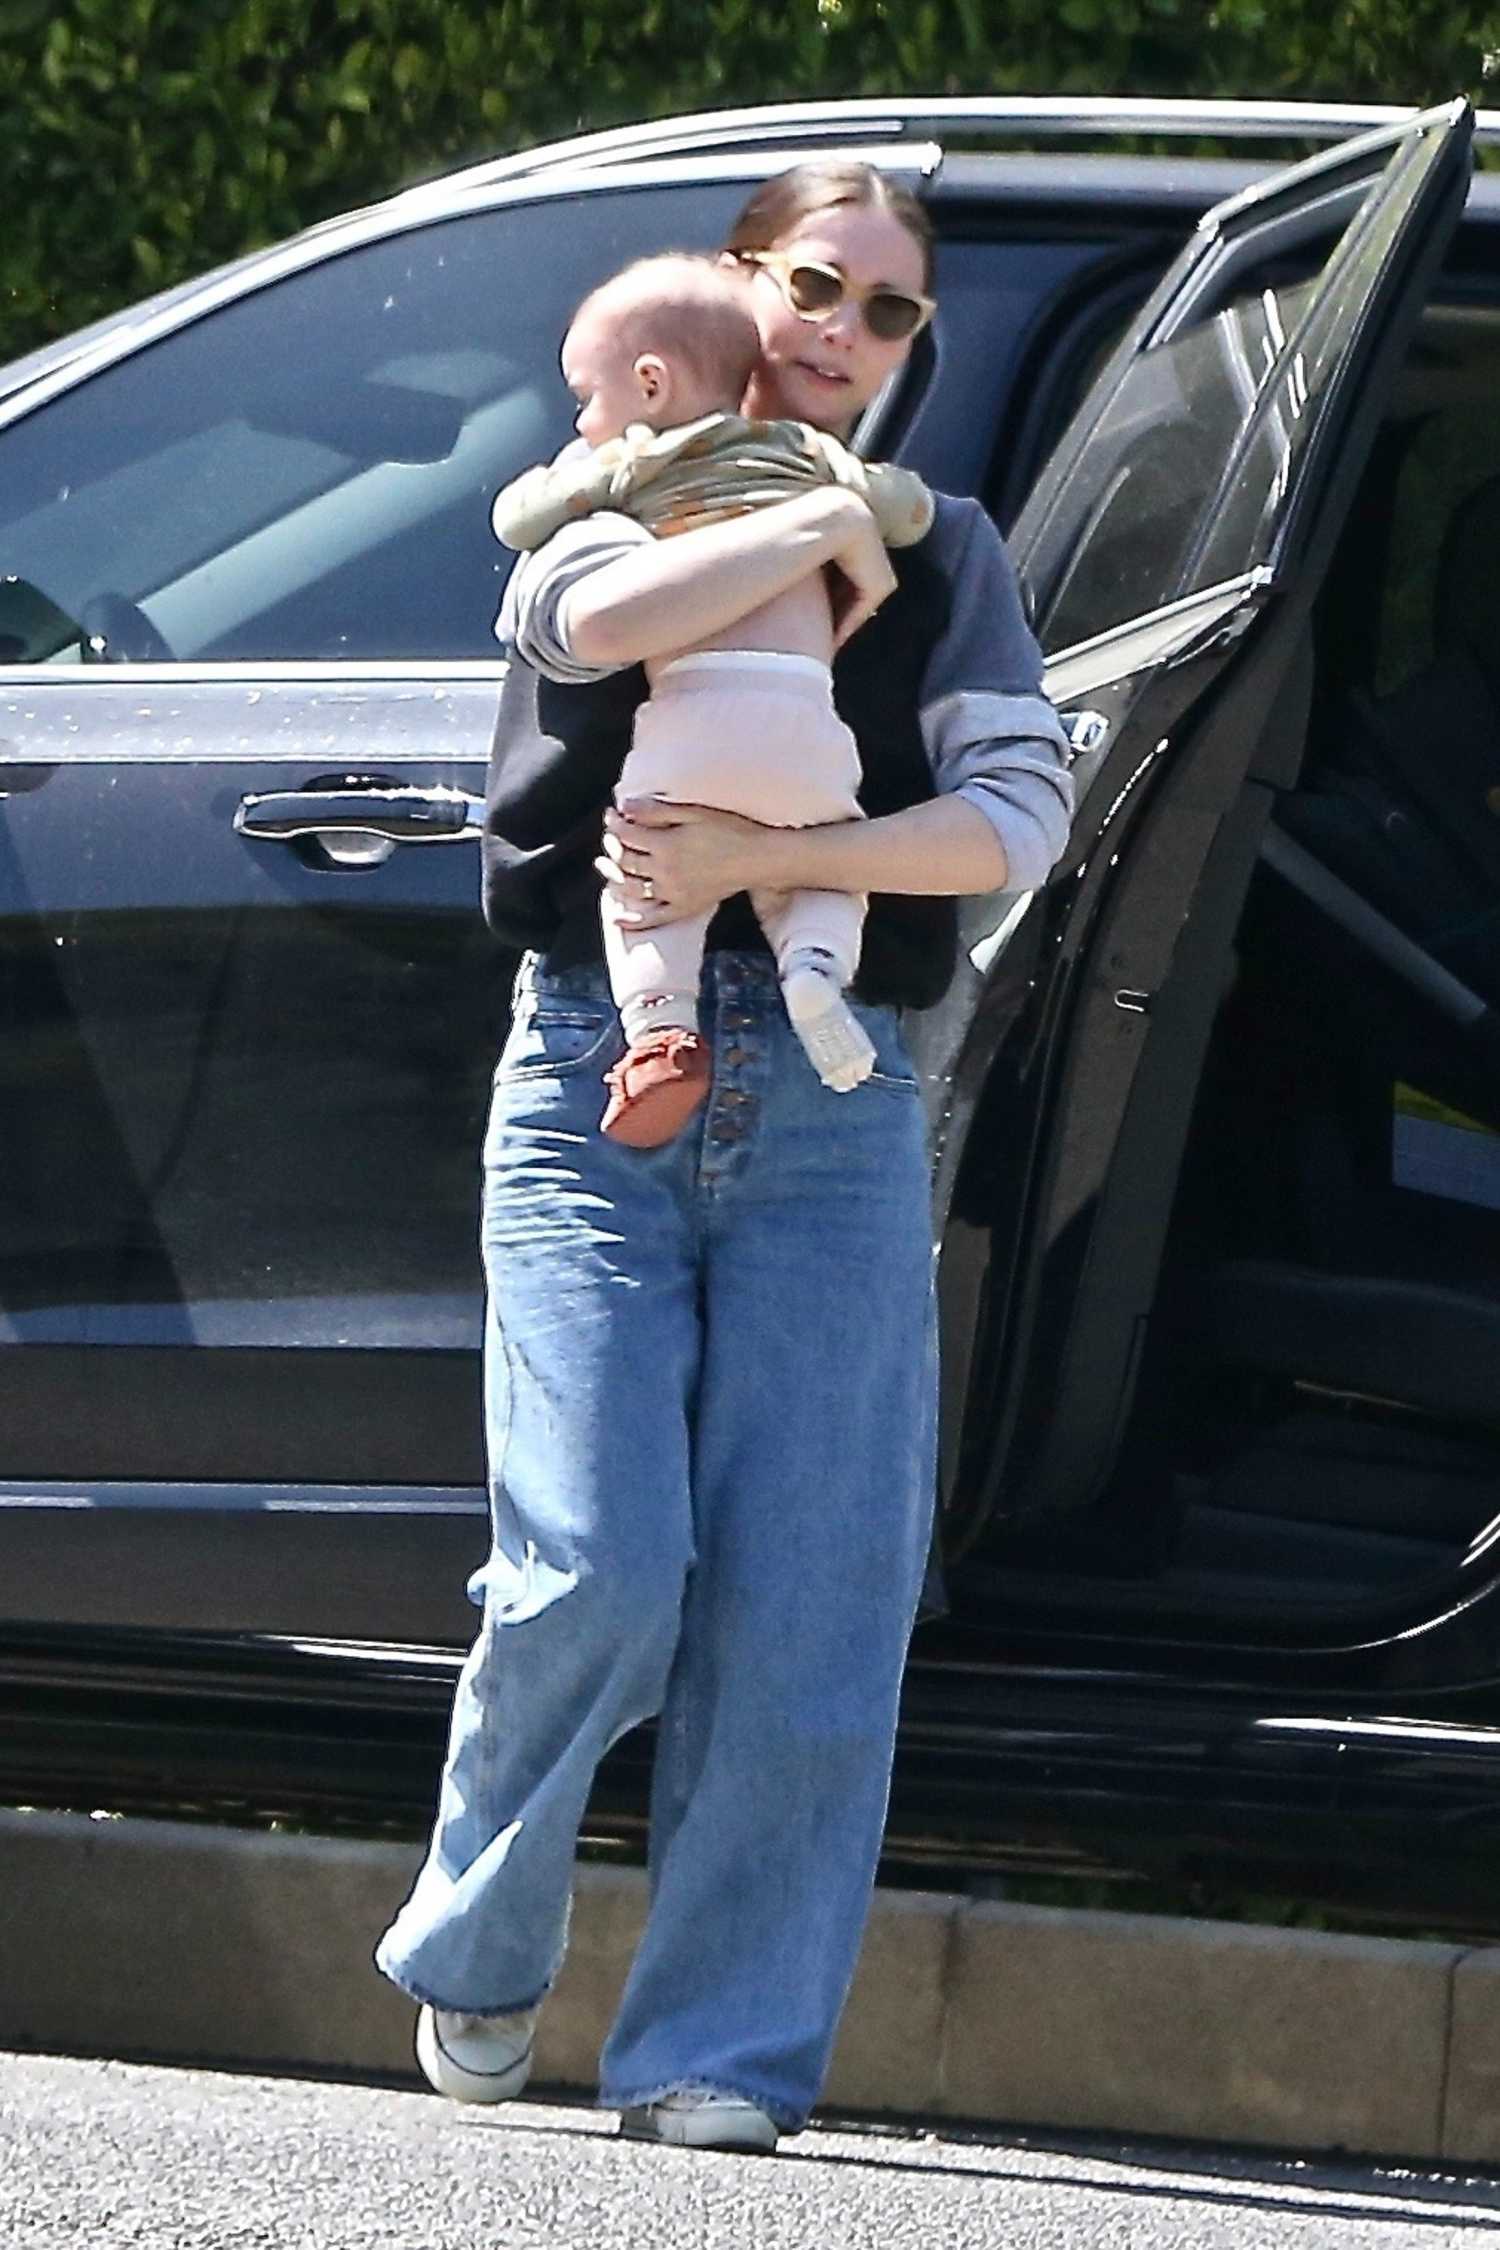 Rooney Mara in a Blue Jeans Arrives at Her Sister's House with Her Baby